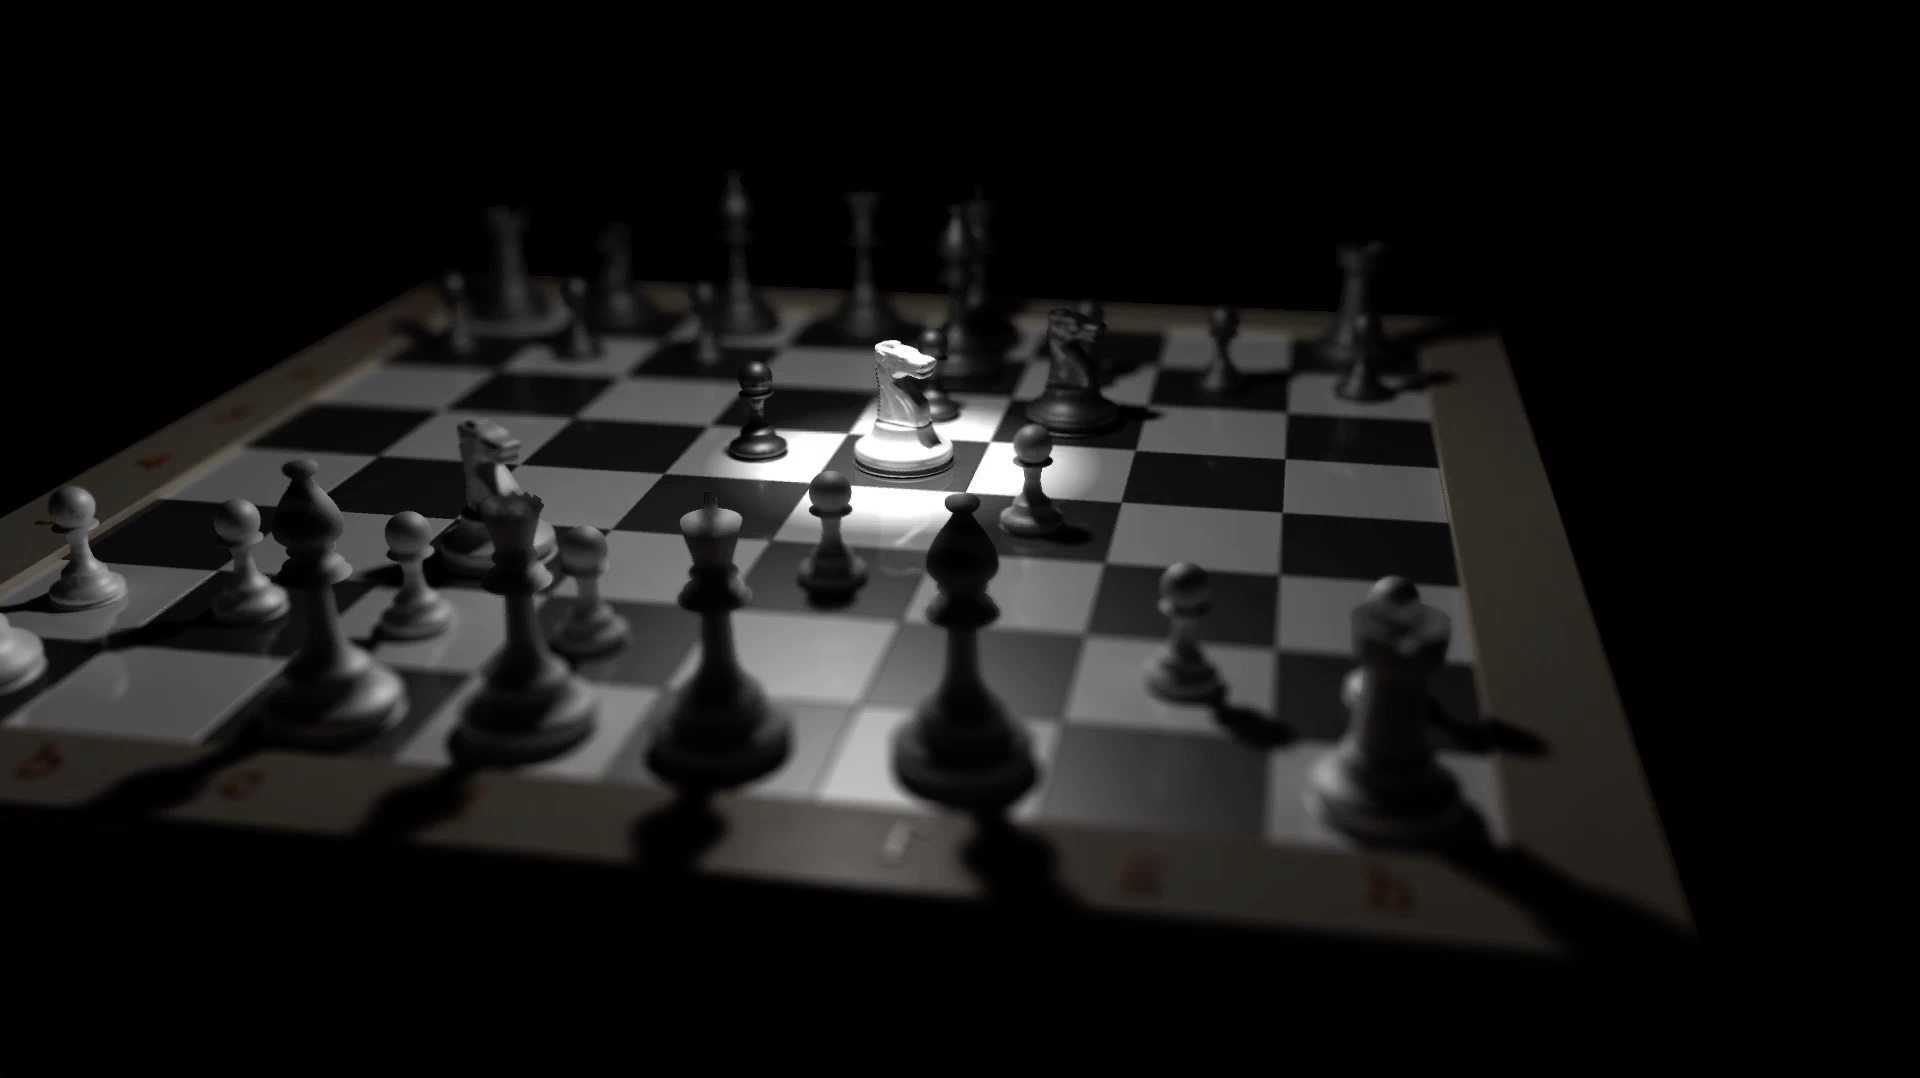 A chess board with an ongoing chess game